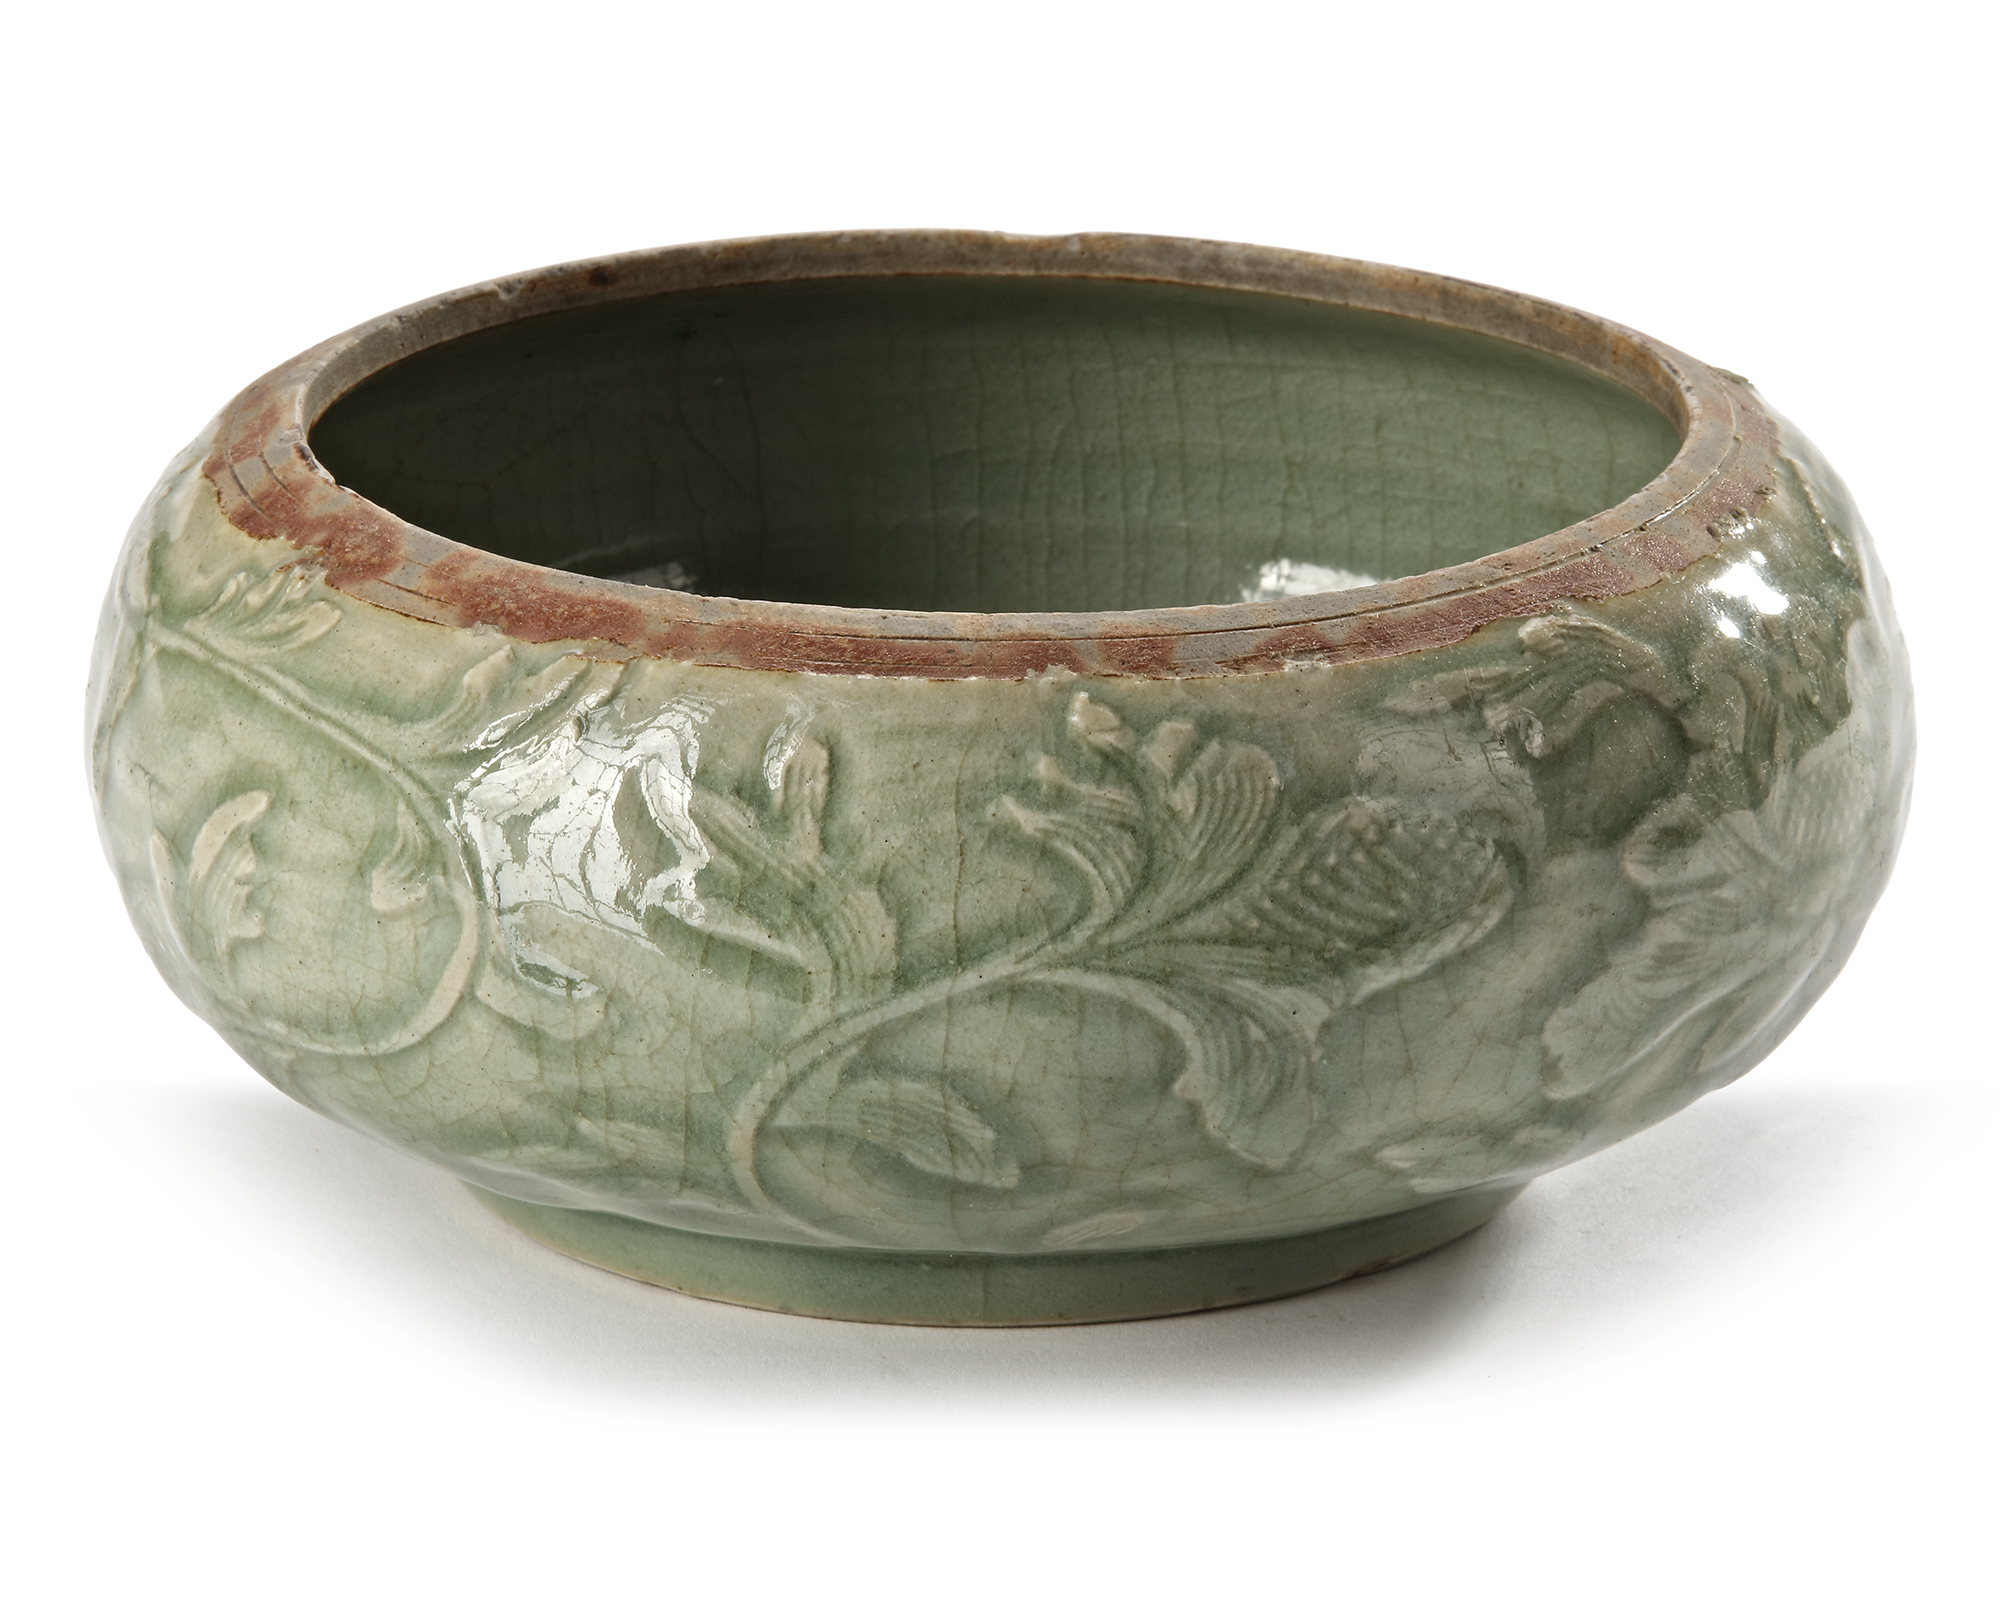 A CHINESE LONGQUAN CELADON BOWL, MING DYNASTY, 15TH CENTURY - Image 2 of 4